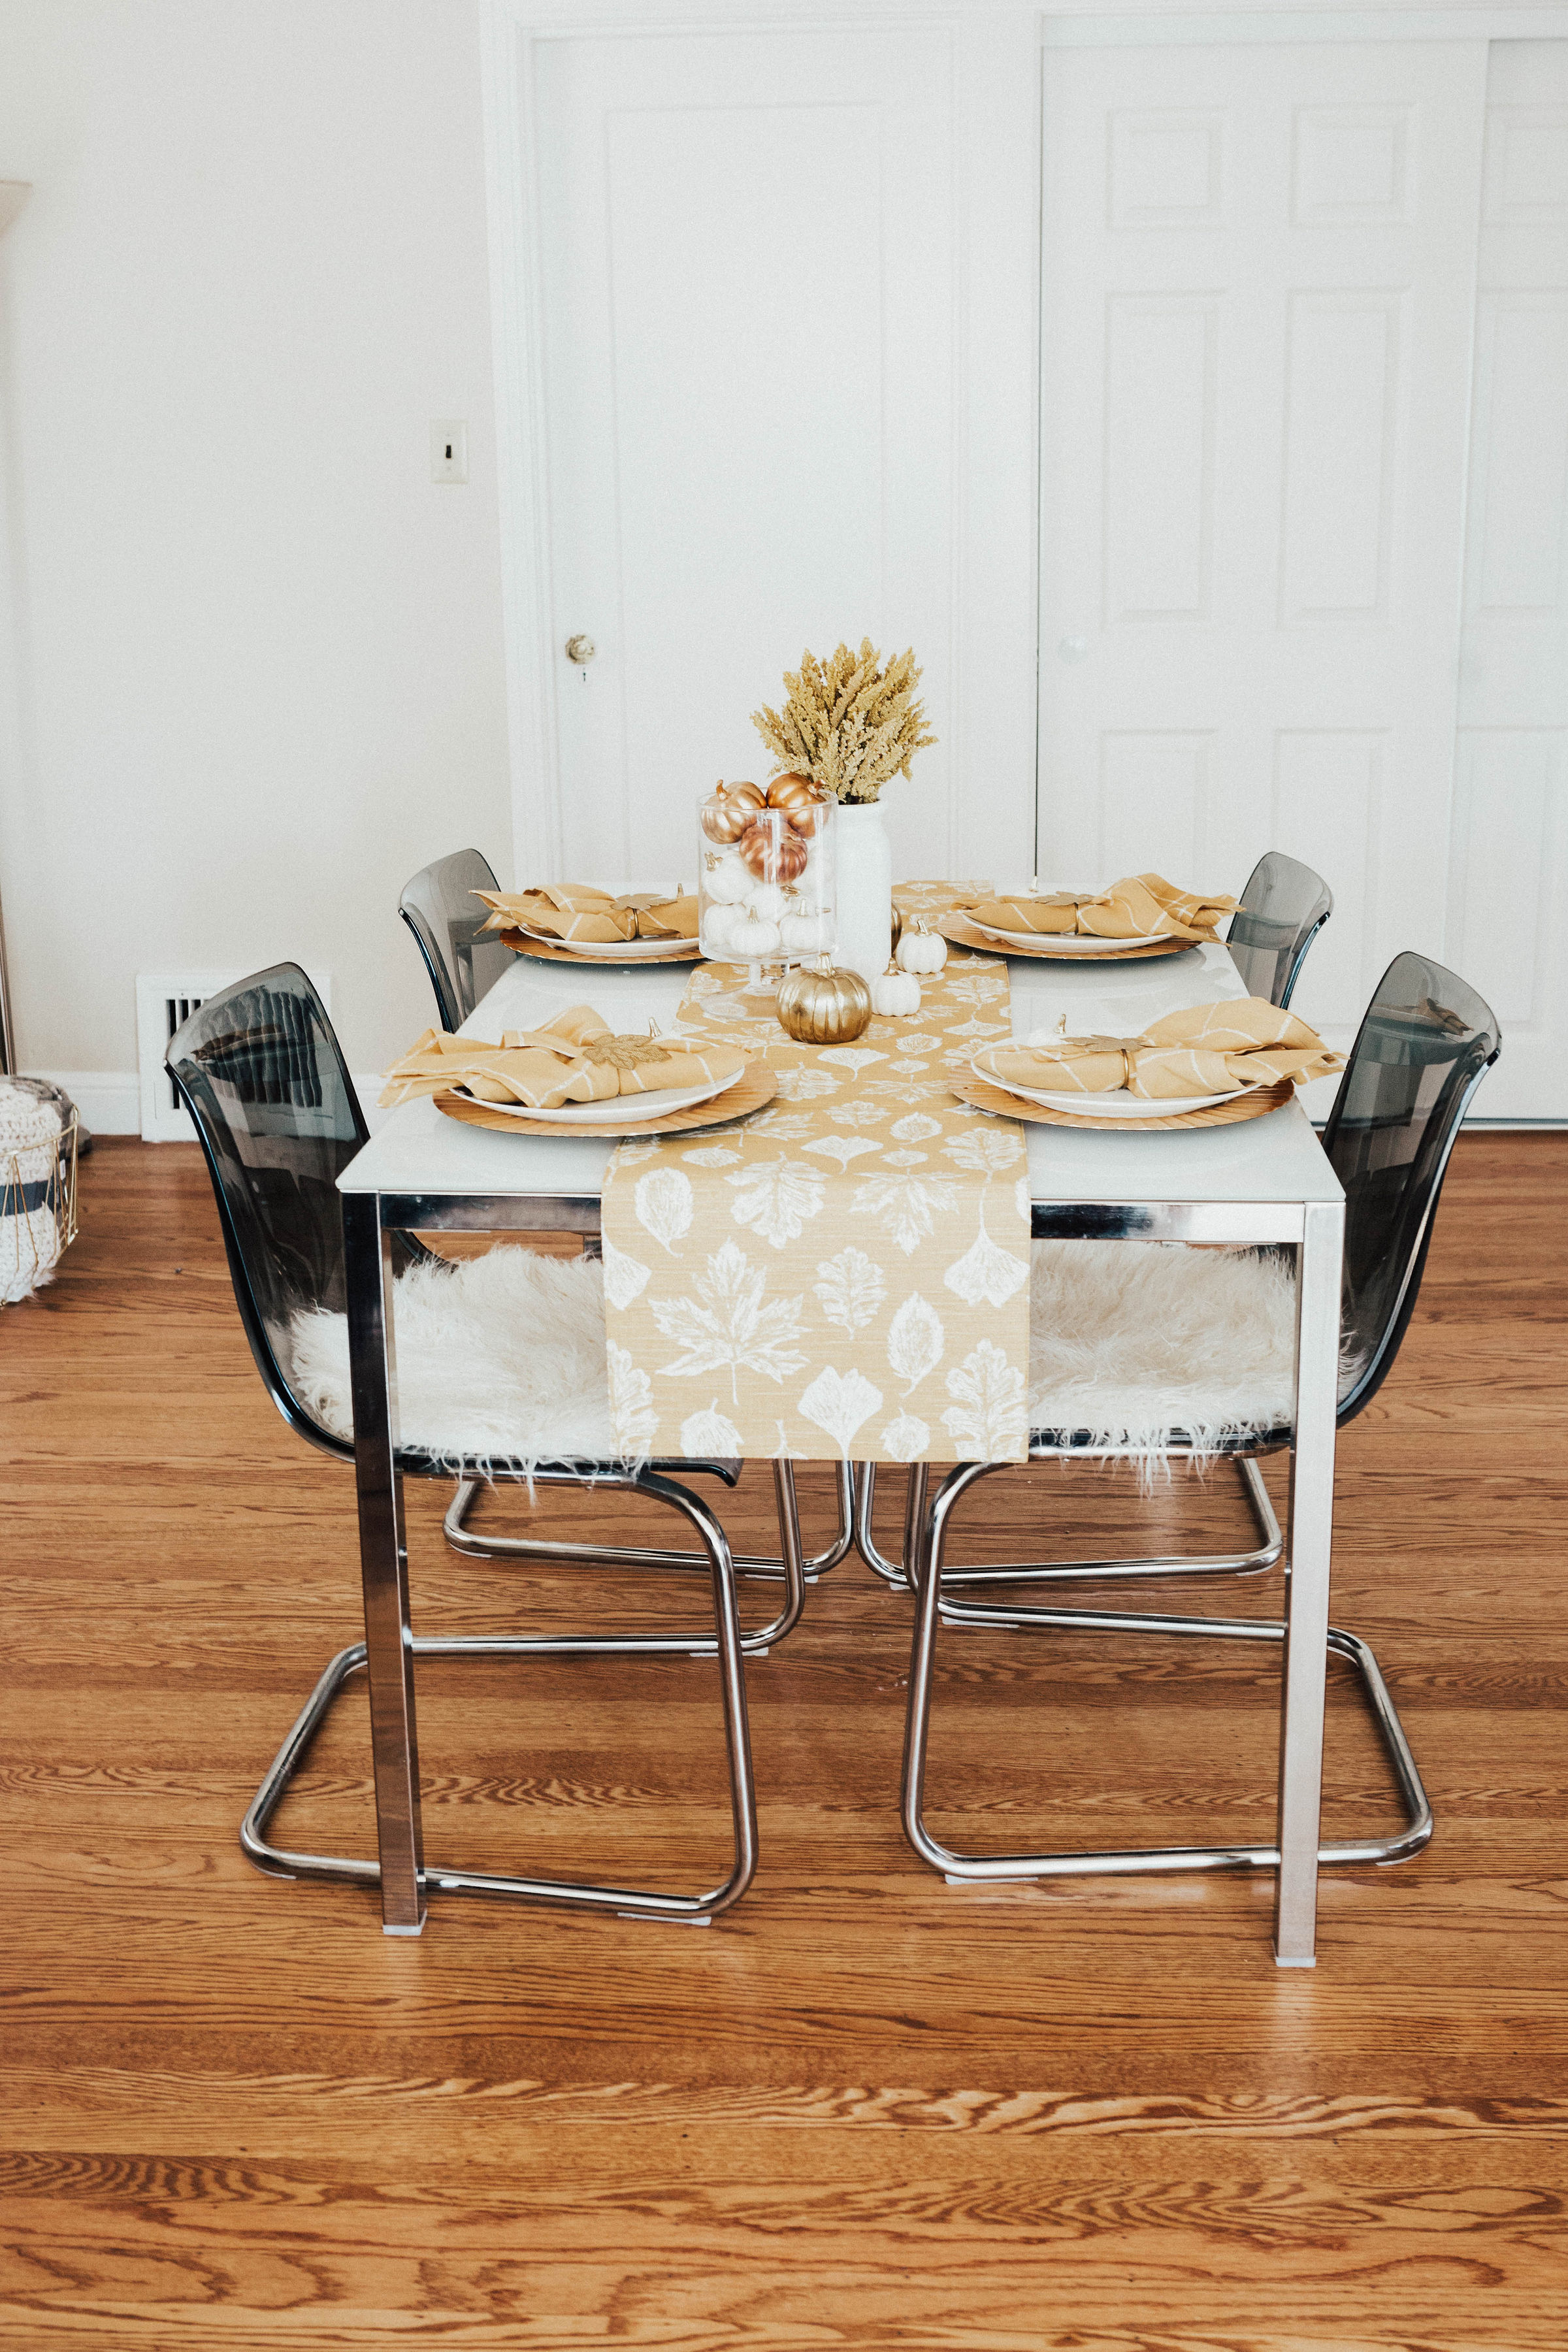 Ashley Zeal from Two Peas in a Prada shares her subtle fall home decor. She shares all of her purchases from Target and how she used what she already had to decorate for the season! 